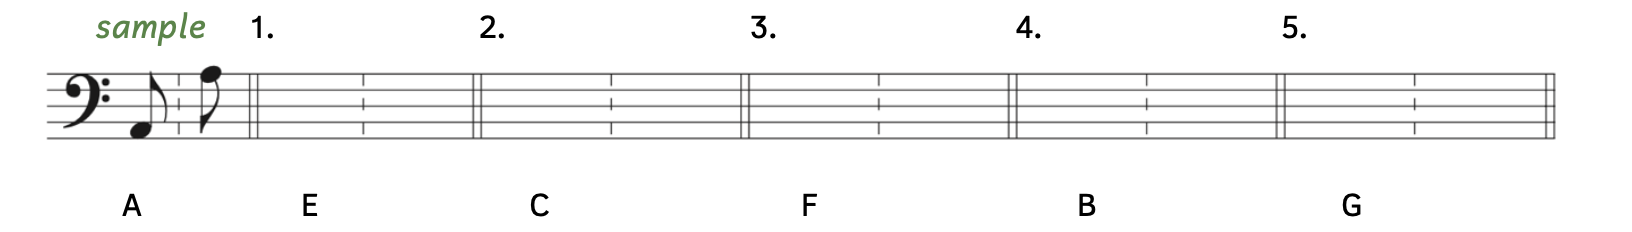 Exercise asking to write eighth notes in the bass clef with a stem pointing up and a stem pointing down. The sample asks for A. The first A is in the first space with a stem pointing up and a flag to the right. The second A is on the fifth line with a stem pointing down and a flag to the right. Number 1 asks for E. Number 2 asks for C. Number 3 asks for F. Number 4 asks for B. Number 5 asks for G.